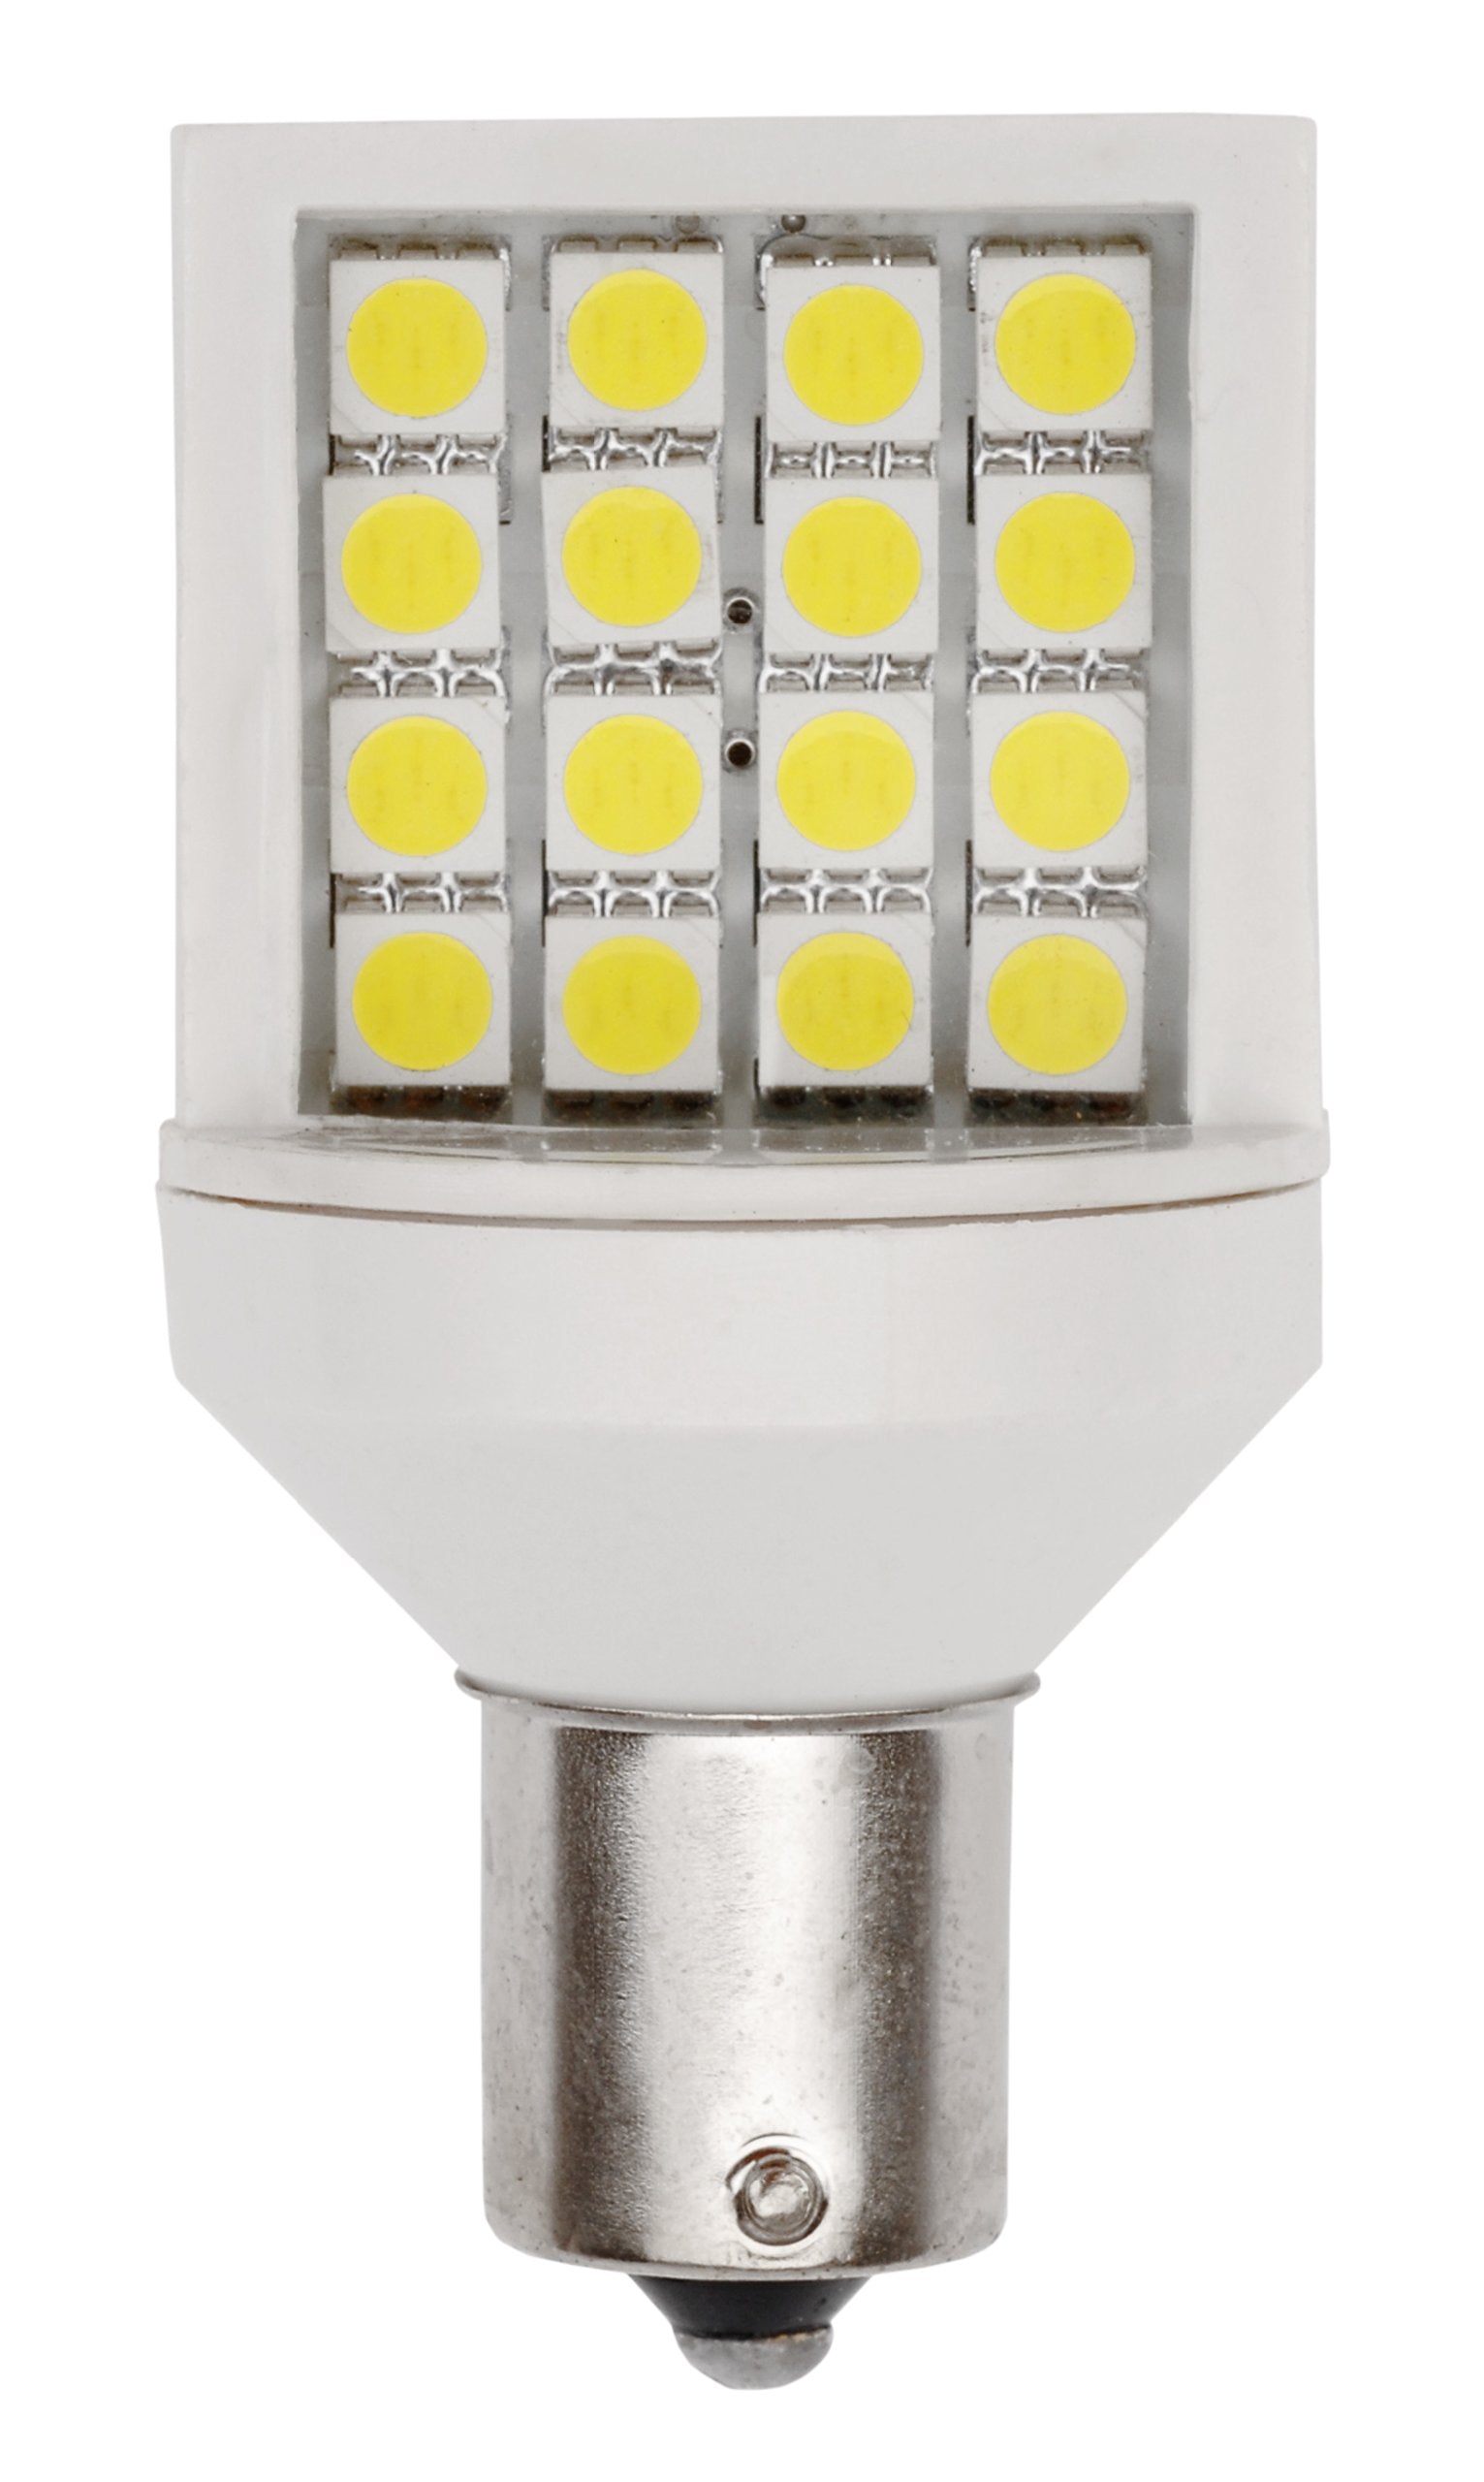 AP Products 016-1141-300 Star Lights 12V Interior Replacement Bulb - 300 Lumens